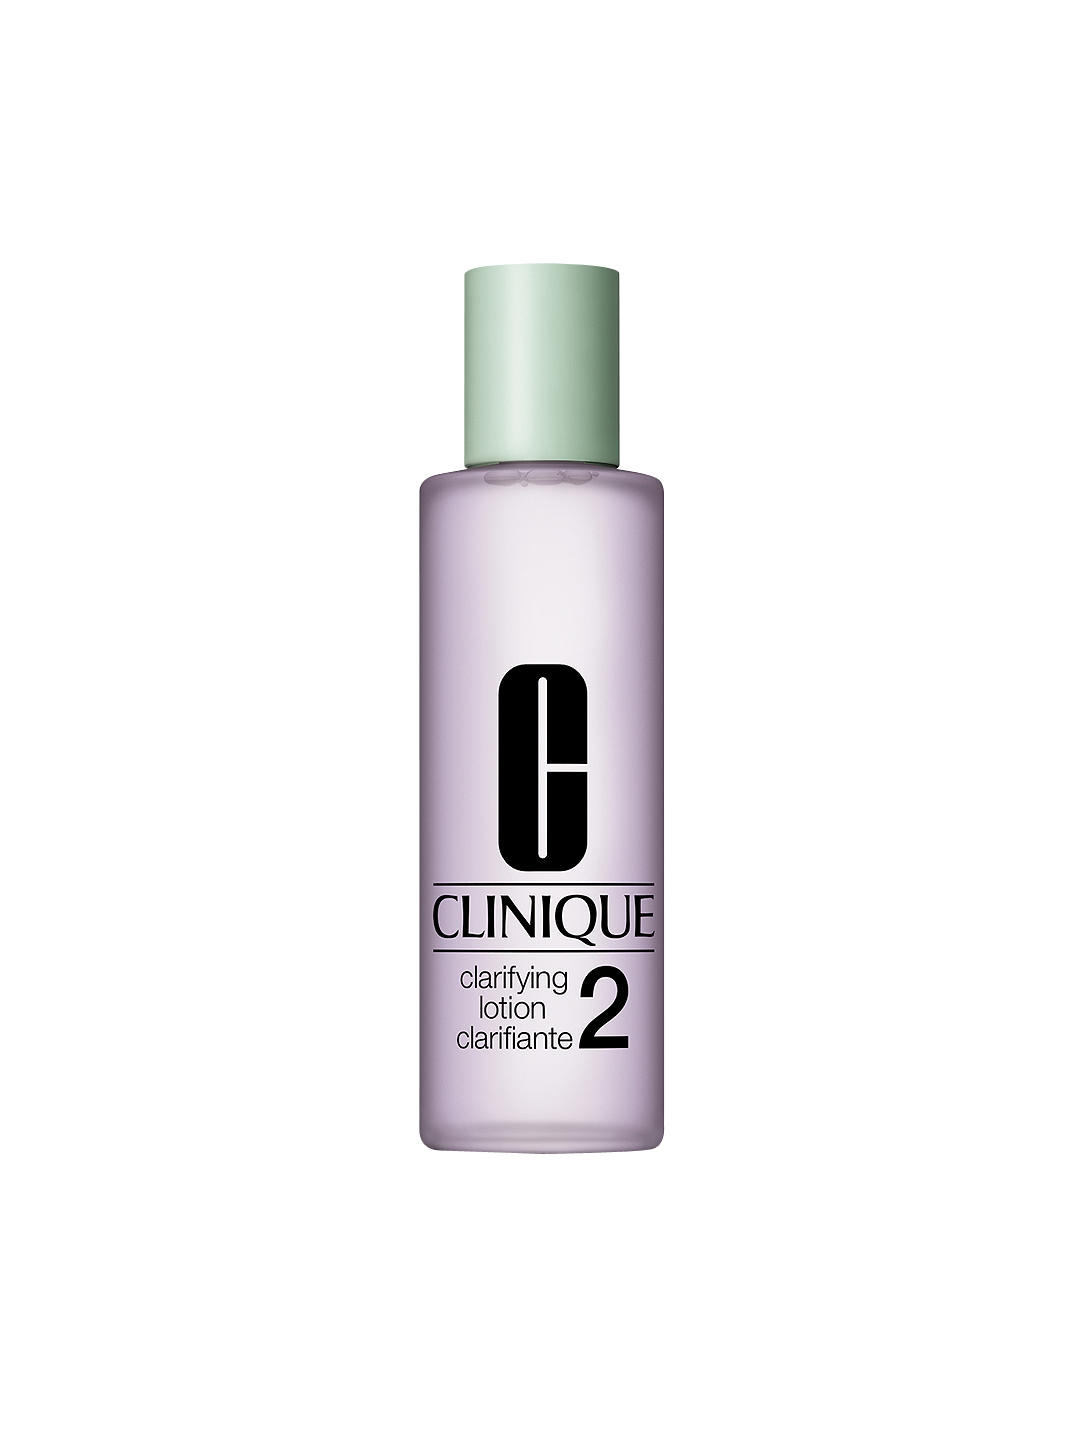 Clinique Clarifying Lotion 2, 400ml 1